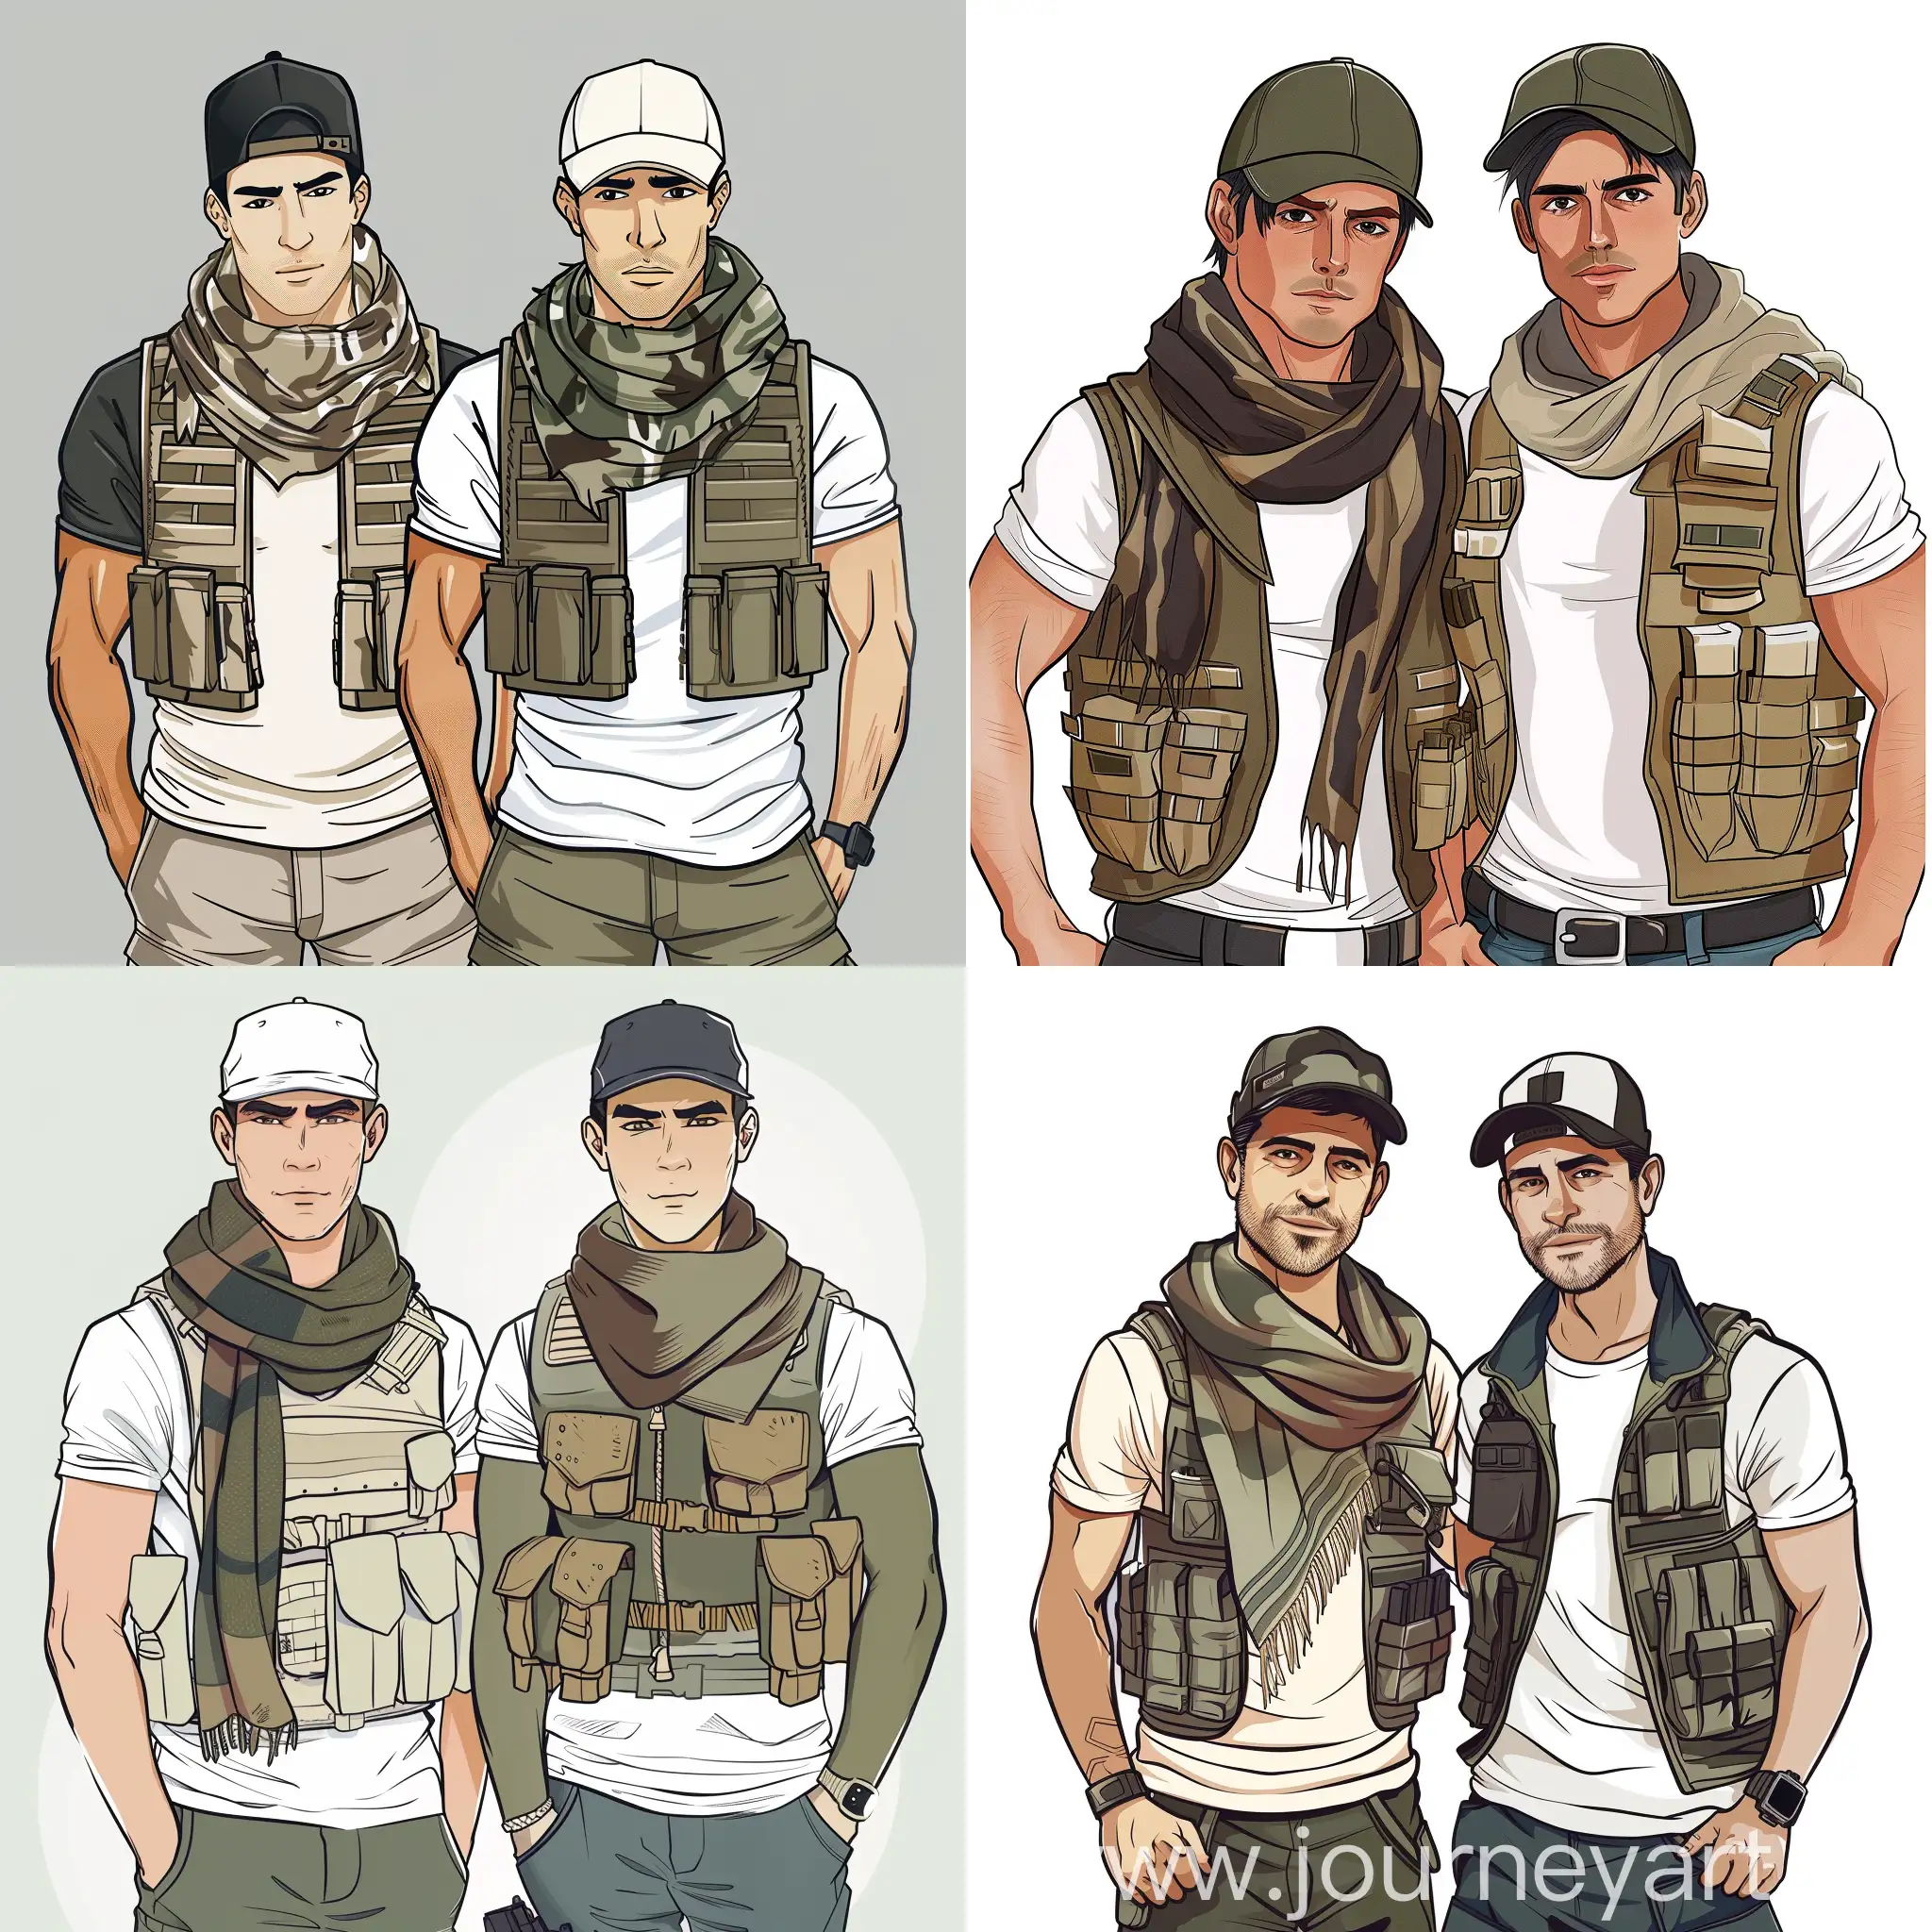 Make 2 men who wear a scarf, a tactical vest, a baseball cap on their heads, the t-shirt under the vest should be white, in cartoon look whit colors 